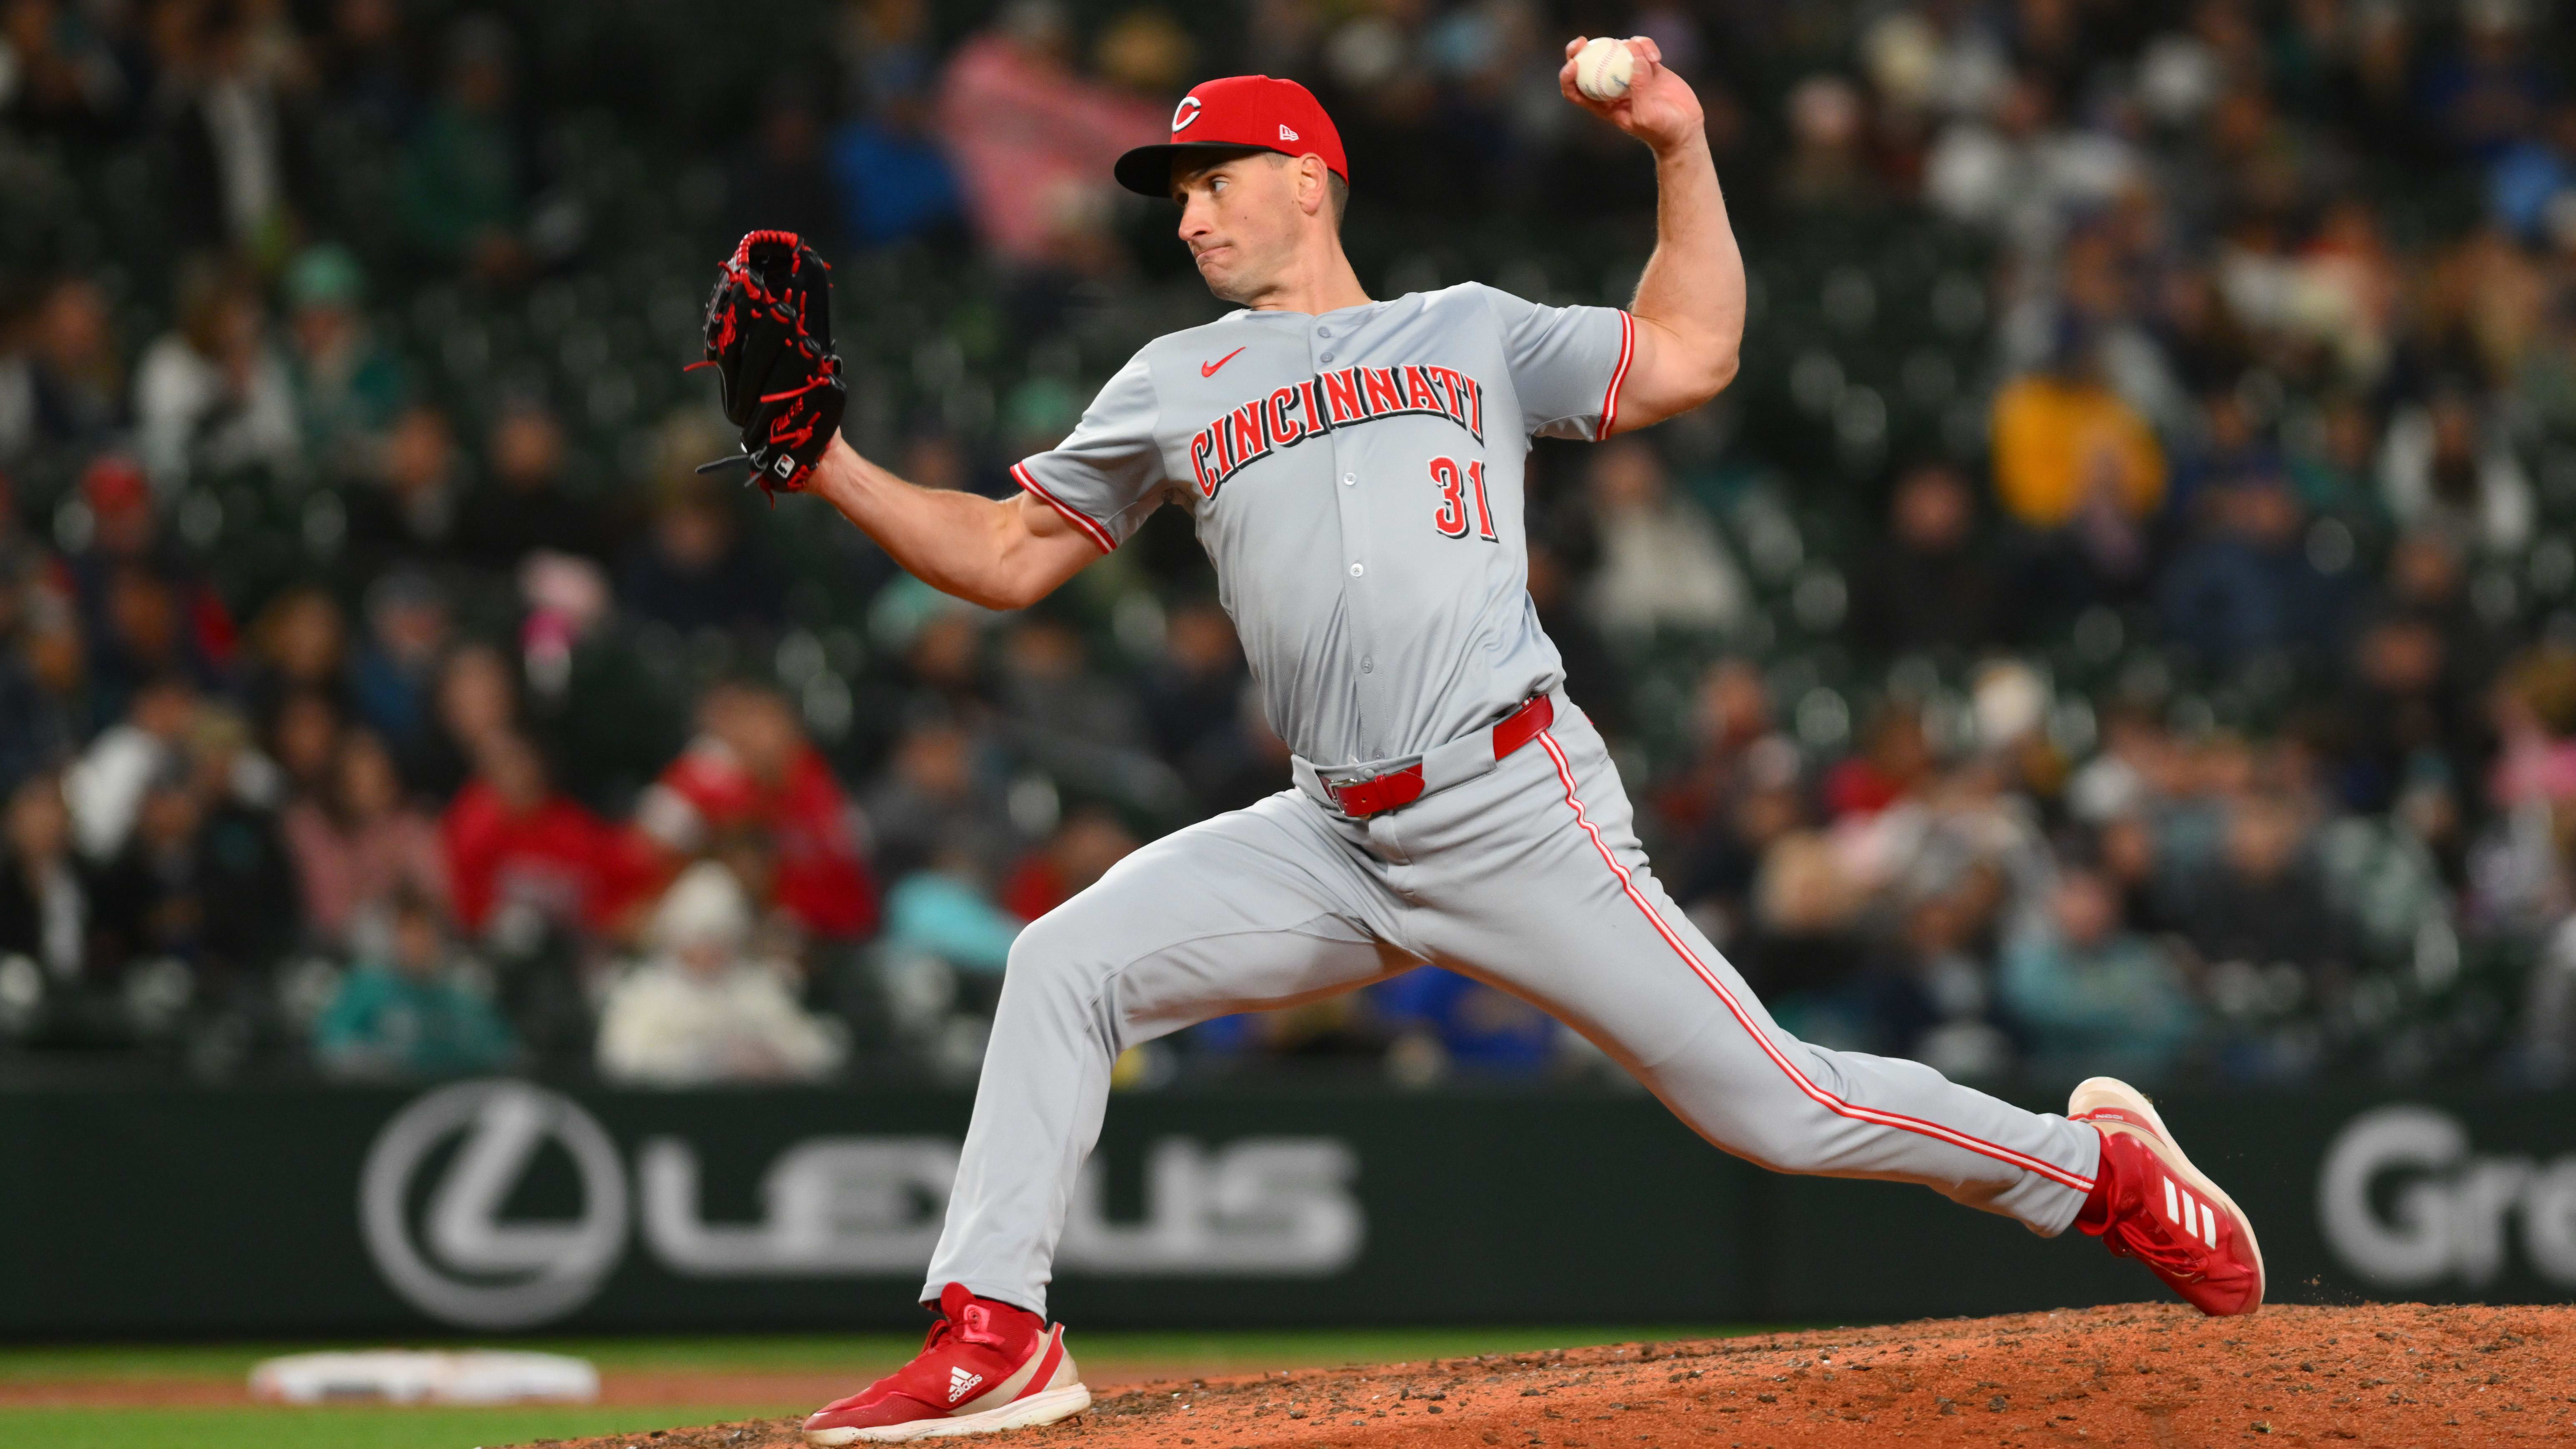  The Good, Bad and Ugly From Cincinnati Reds' 3-1 Loss to Seattle Mariners 